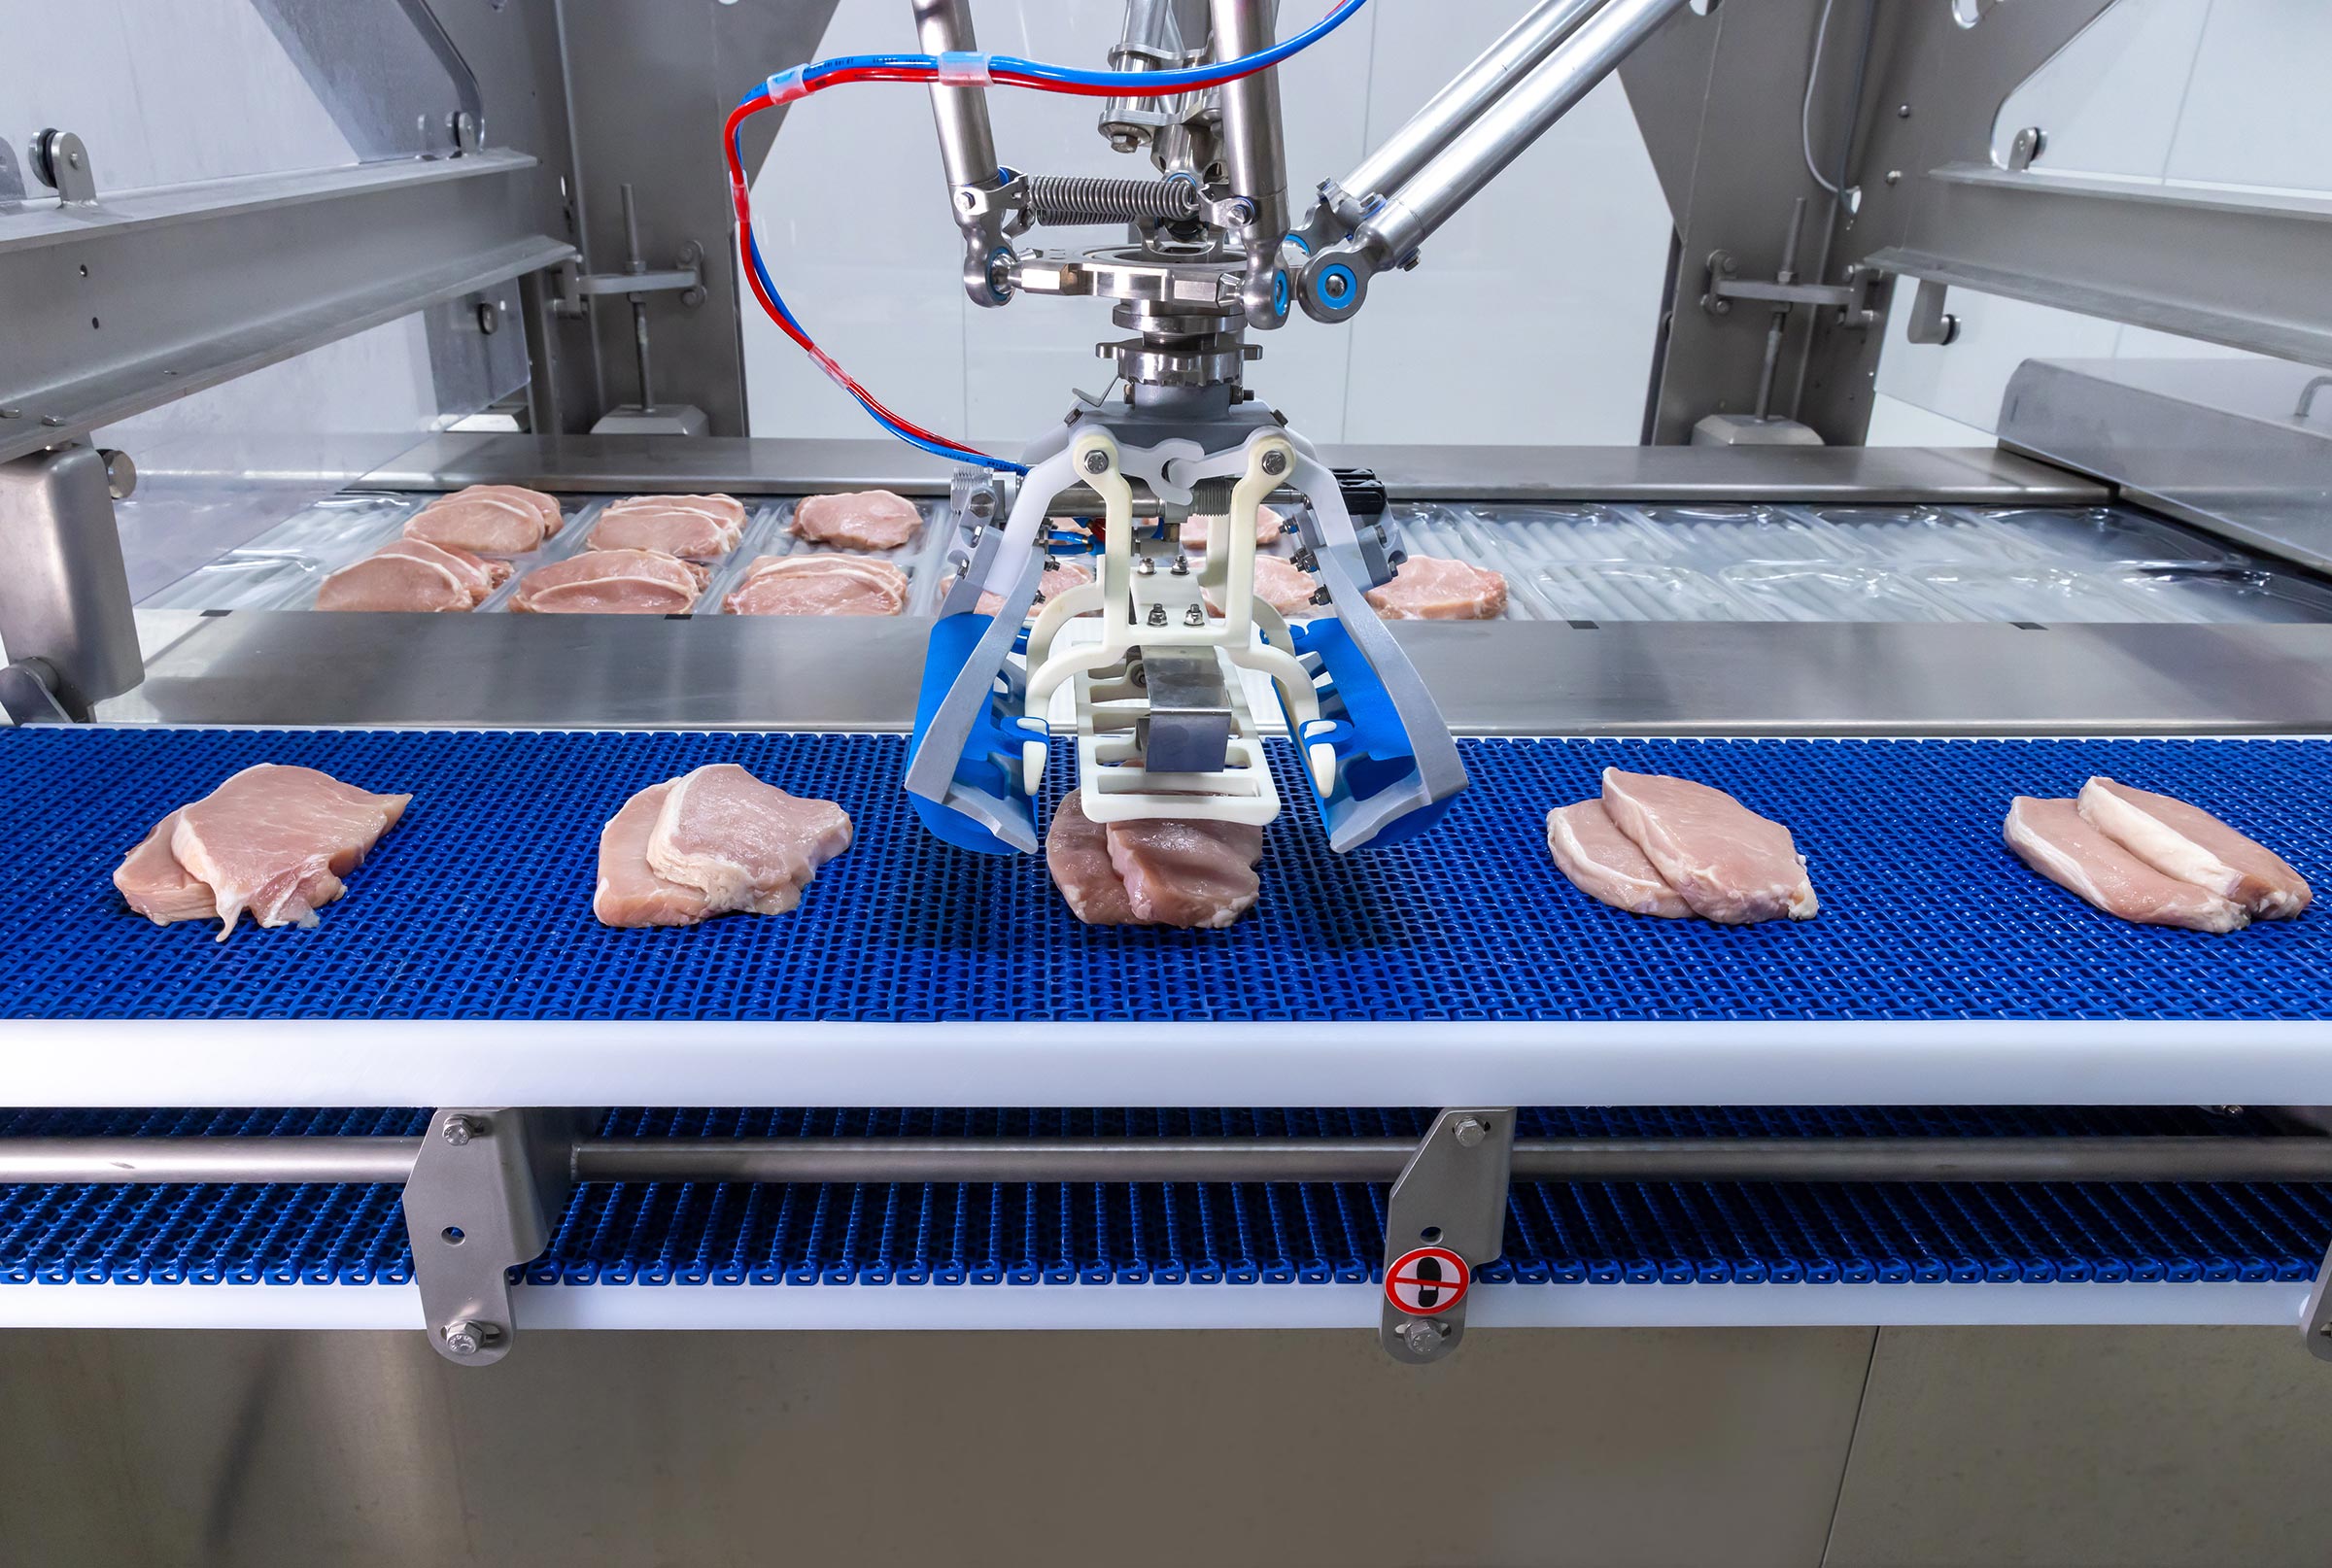 RoboBatcher robotic arm placing a sirloin steak into thermoformer pack with consistent and accurate alignment